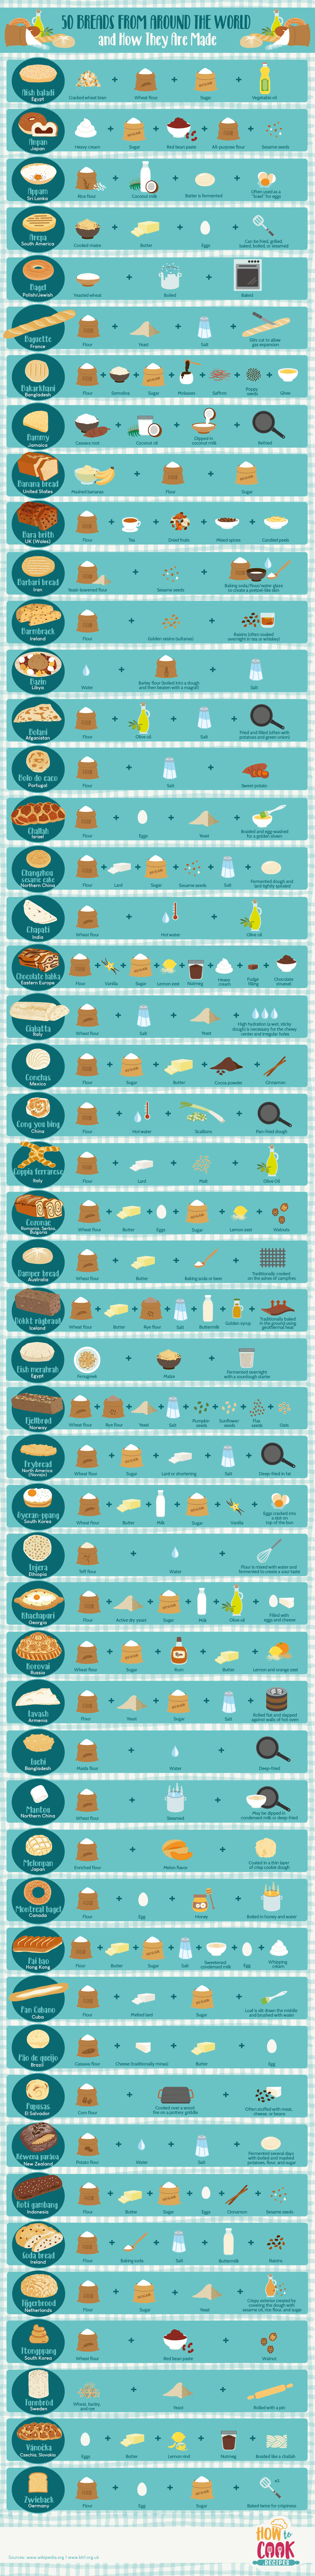 How Different Breads From Around the World Are Made